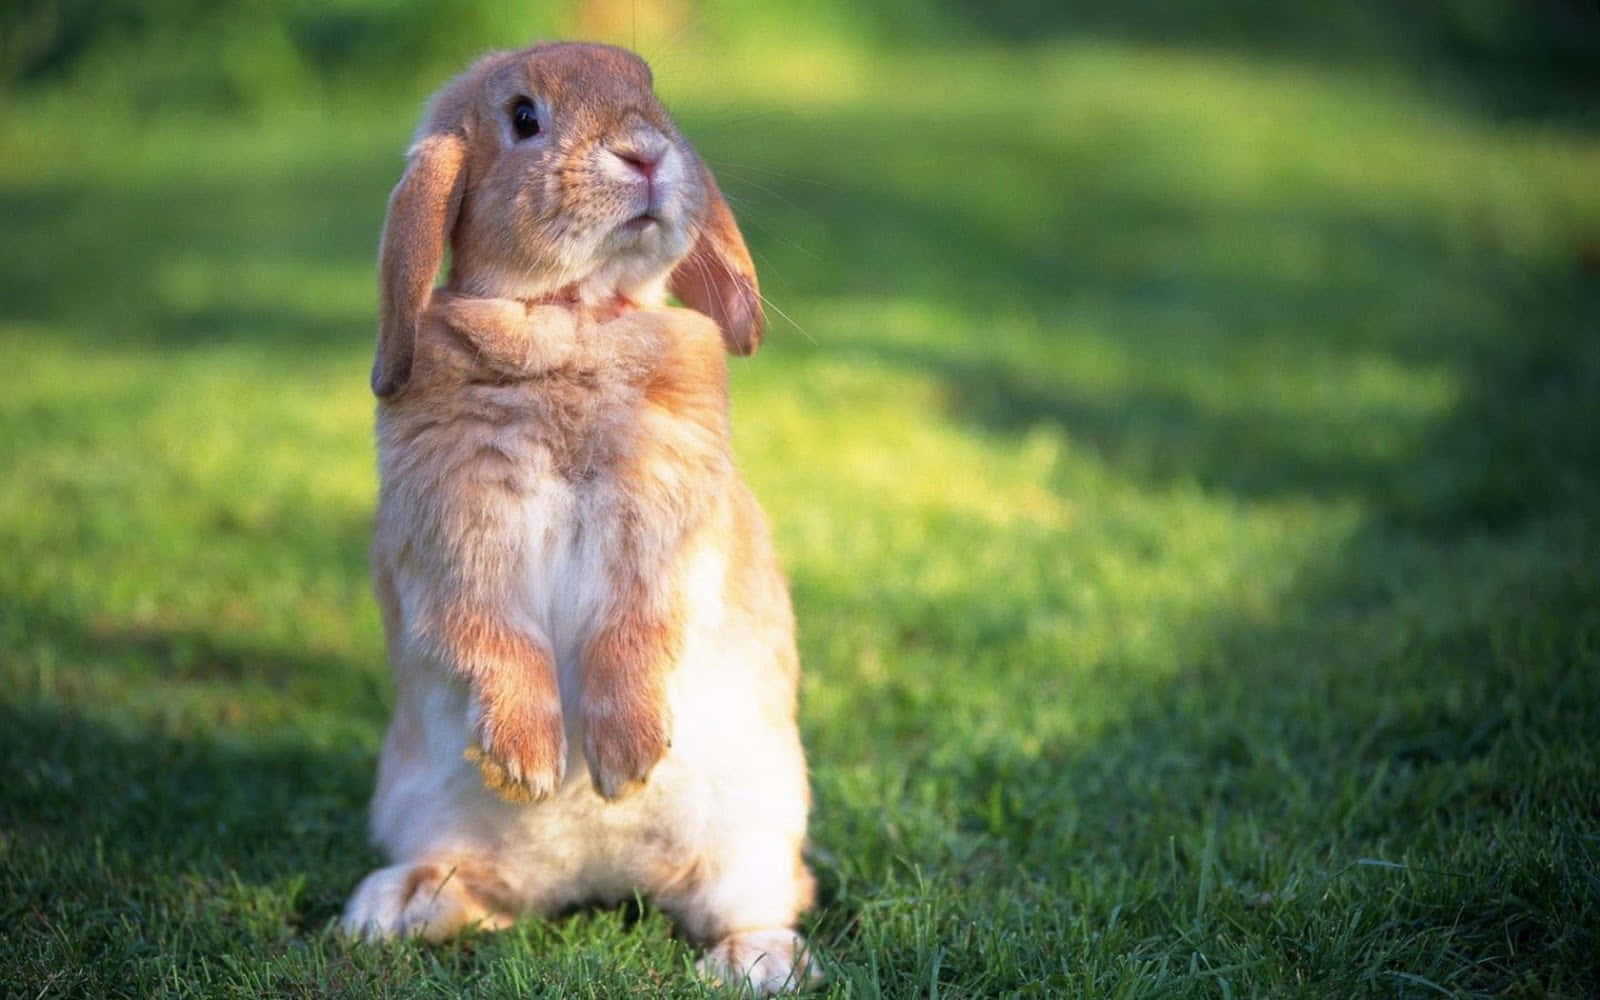 A Rabbit Standing On Its Hind Legs In The Grass Wallpaper